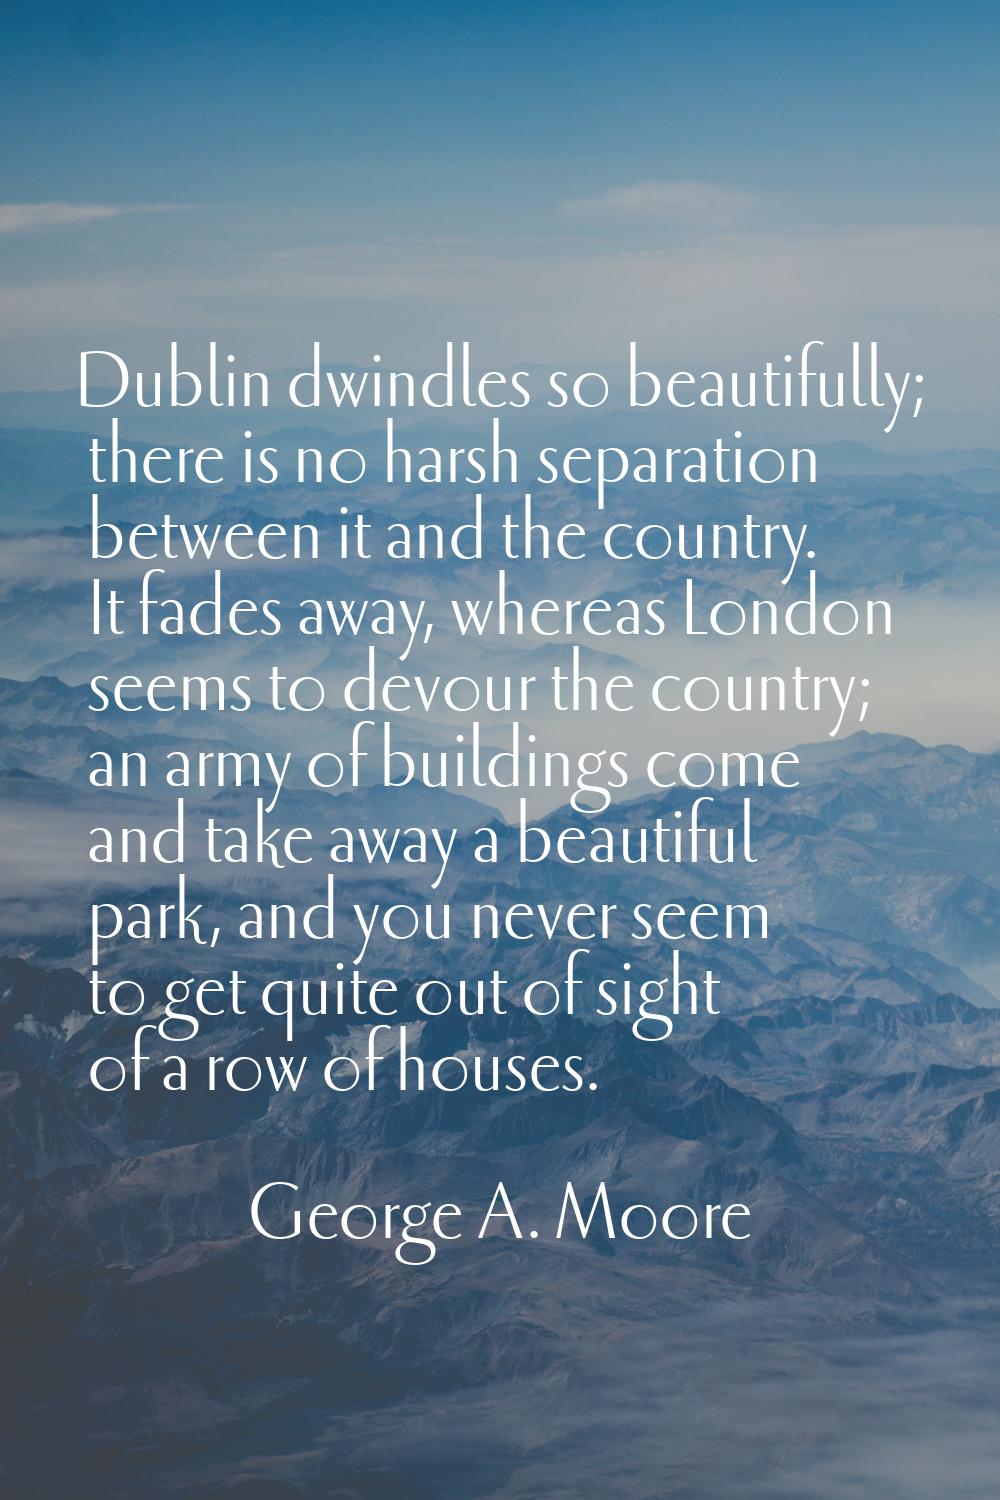 Dublin dwindles so beautifully; there is no harsh separation between it and the country. It fades a